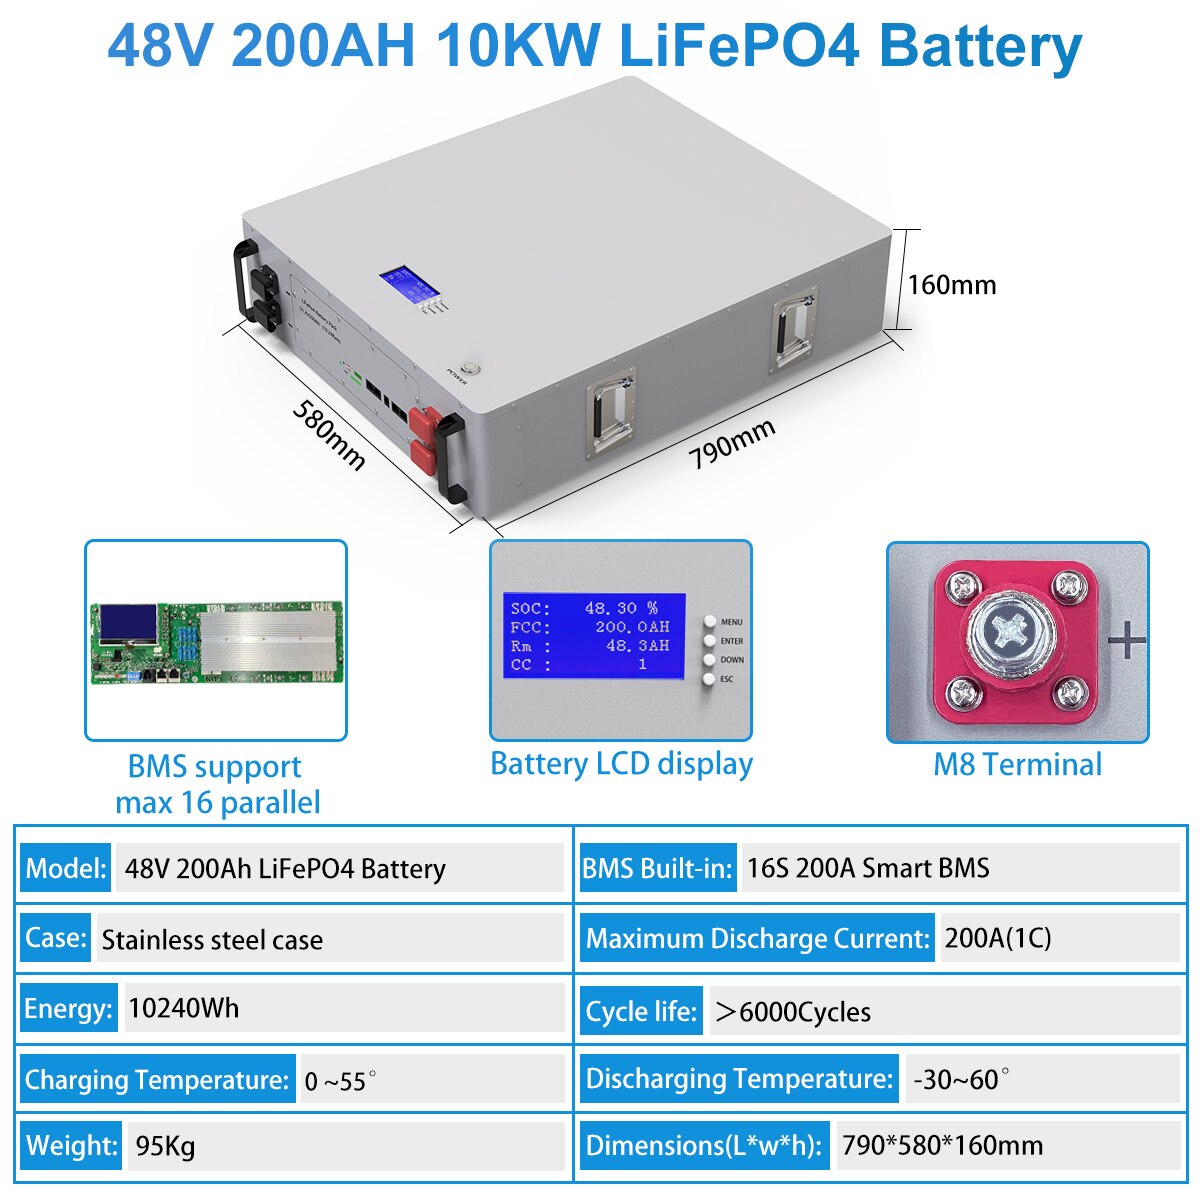 Powerwall LiFePO4 48V 100AH 5KW Battery Pack - 51.2V Lithium Solar Battery 6000+ Cycle With RS485 CAN COM For Off/On-Grid Inverter